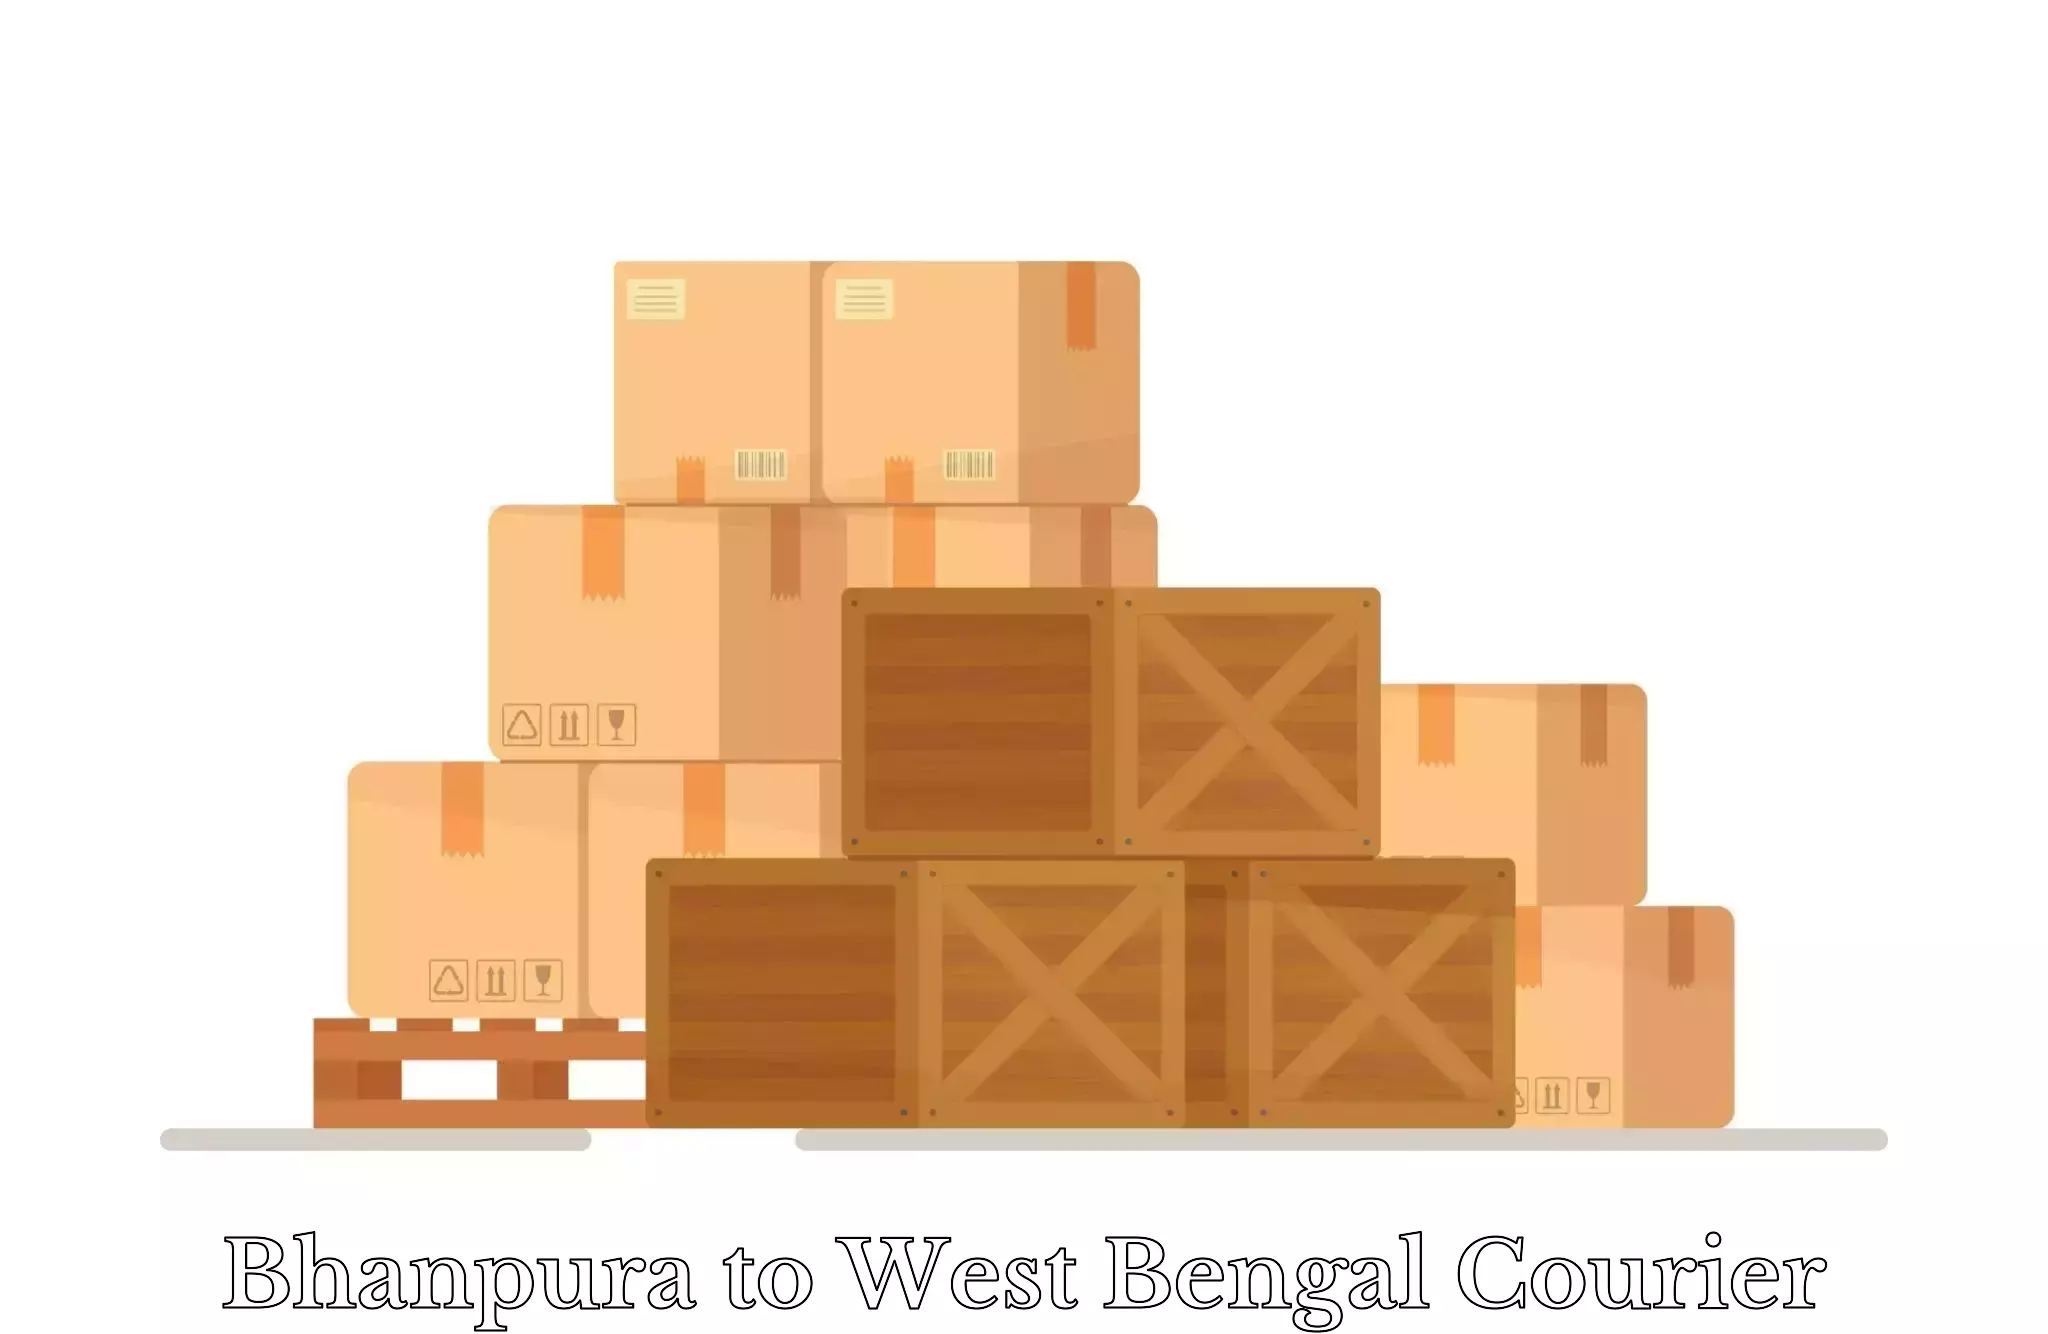 Same day luggage service Bhanpura to West Bengal